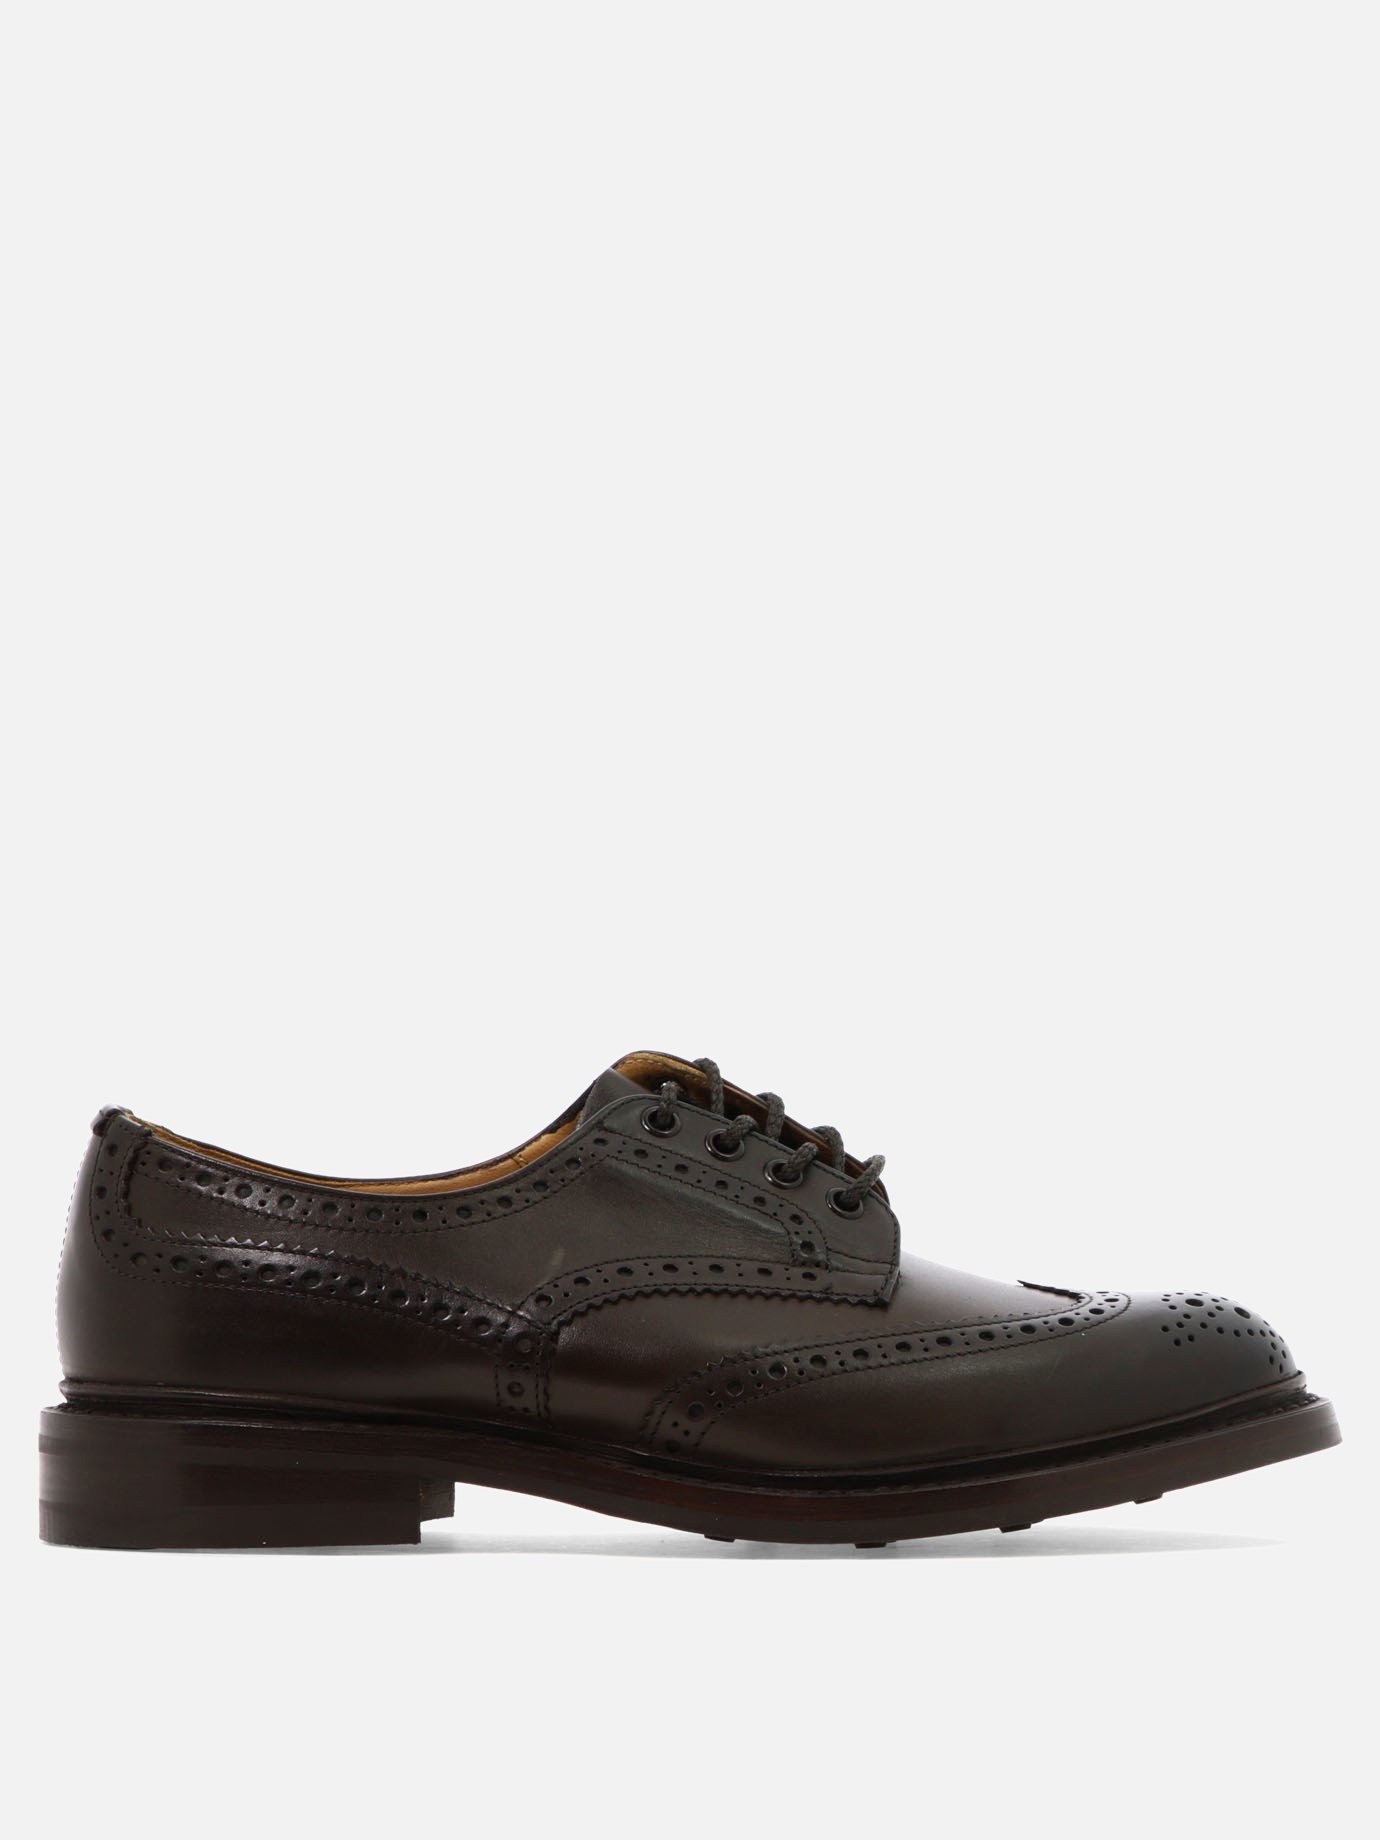  Bourton  lace-up shoesby Tricker's - 5